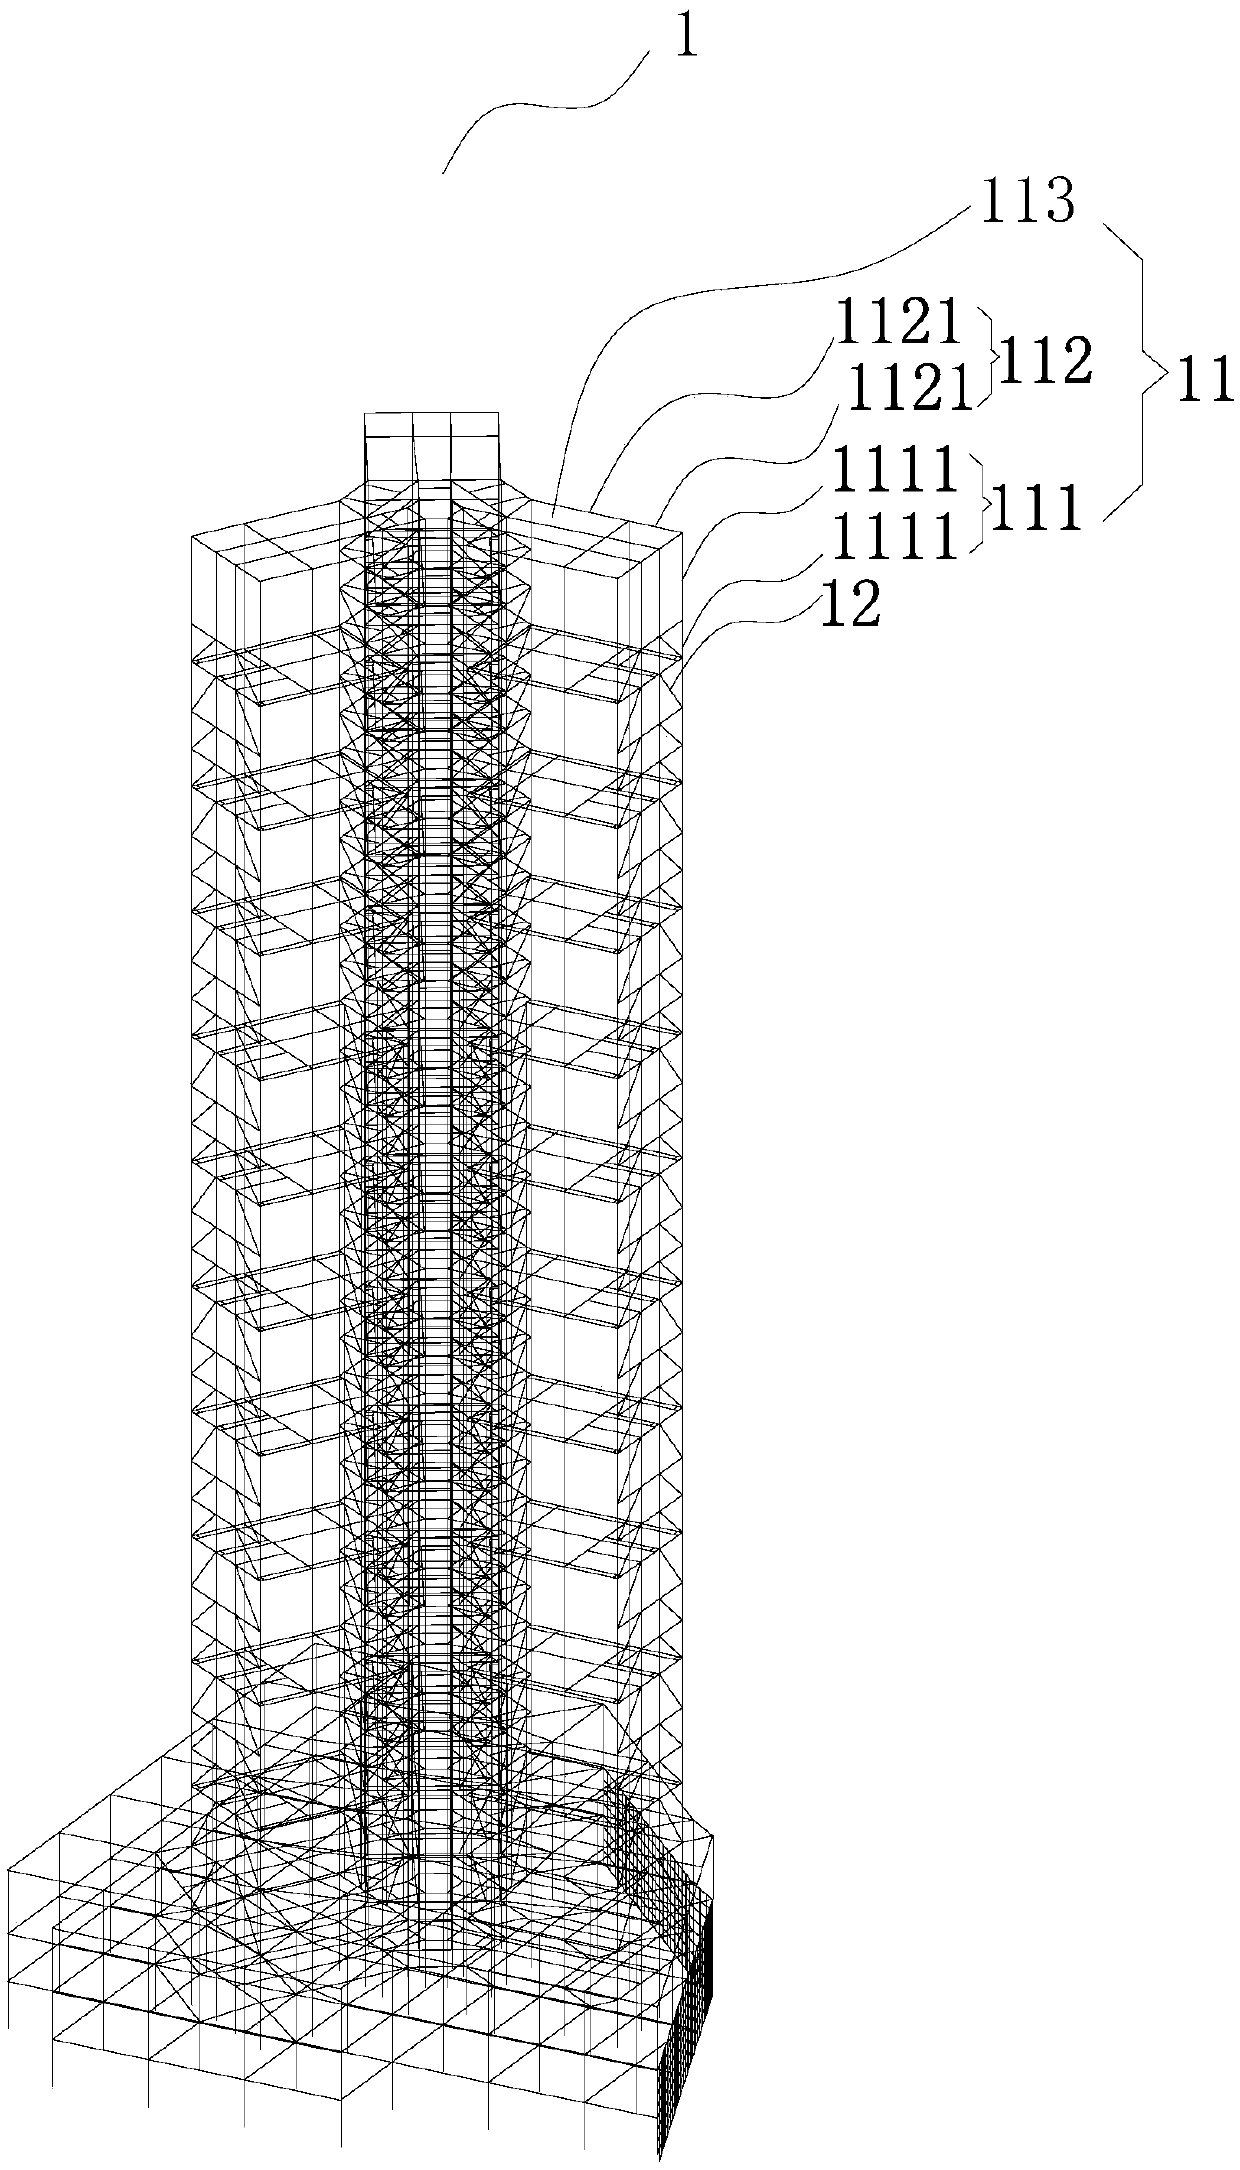 Building structural system